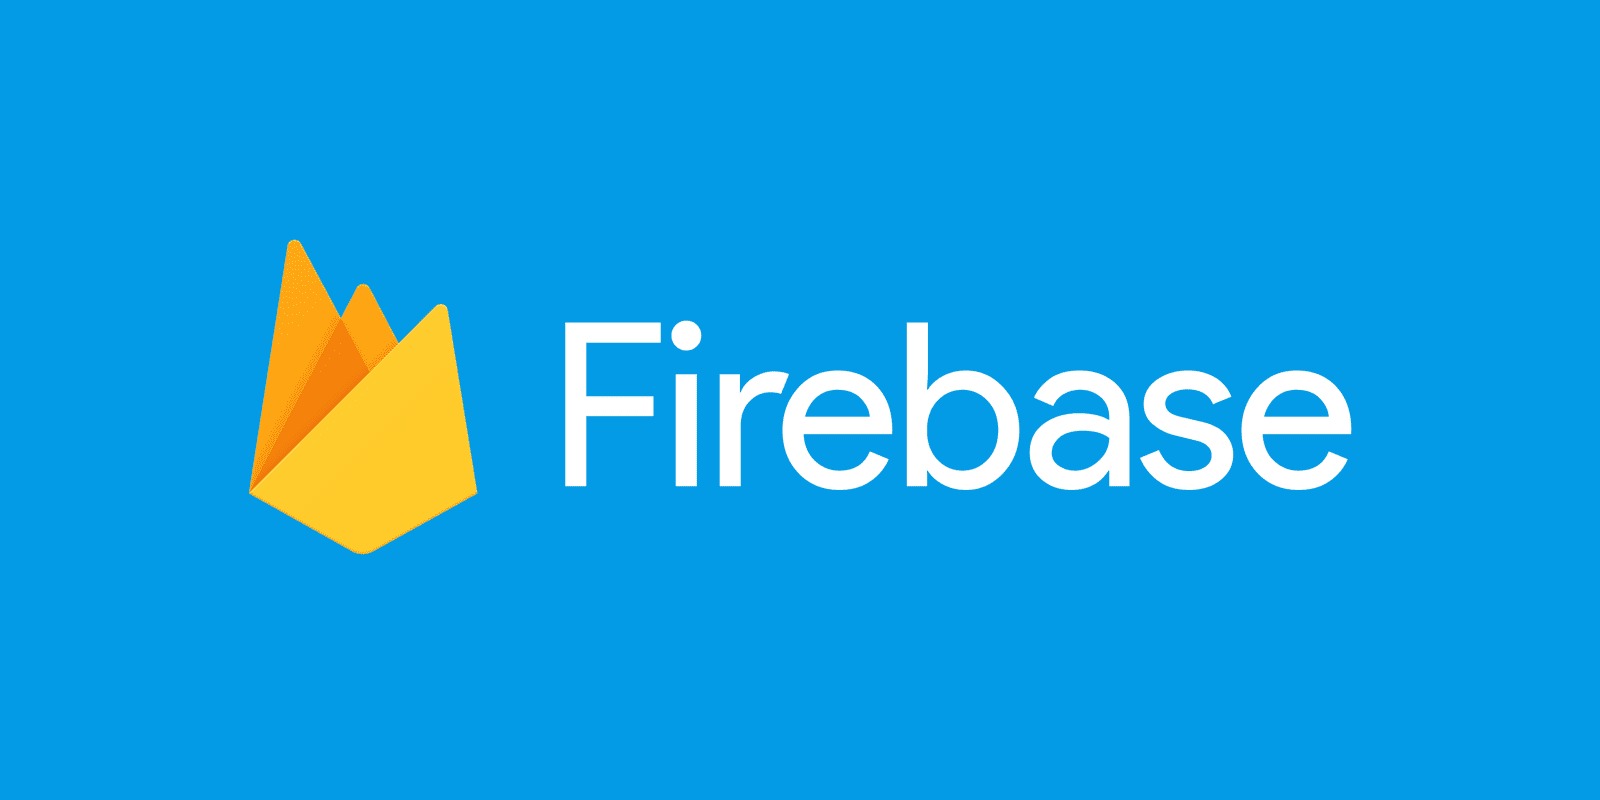 In this article, we covered what is Google Firebase, what is Firebase used for, and how it can benefit your app development process.